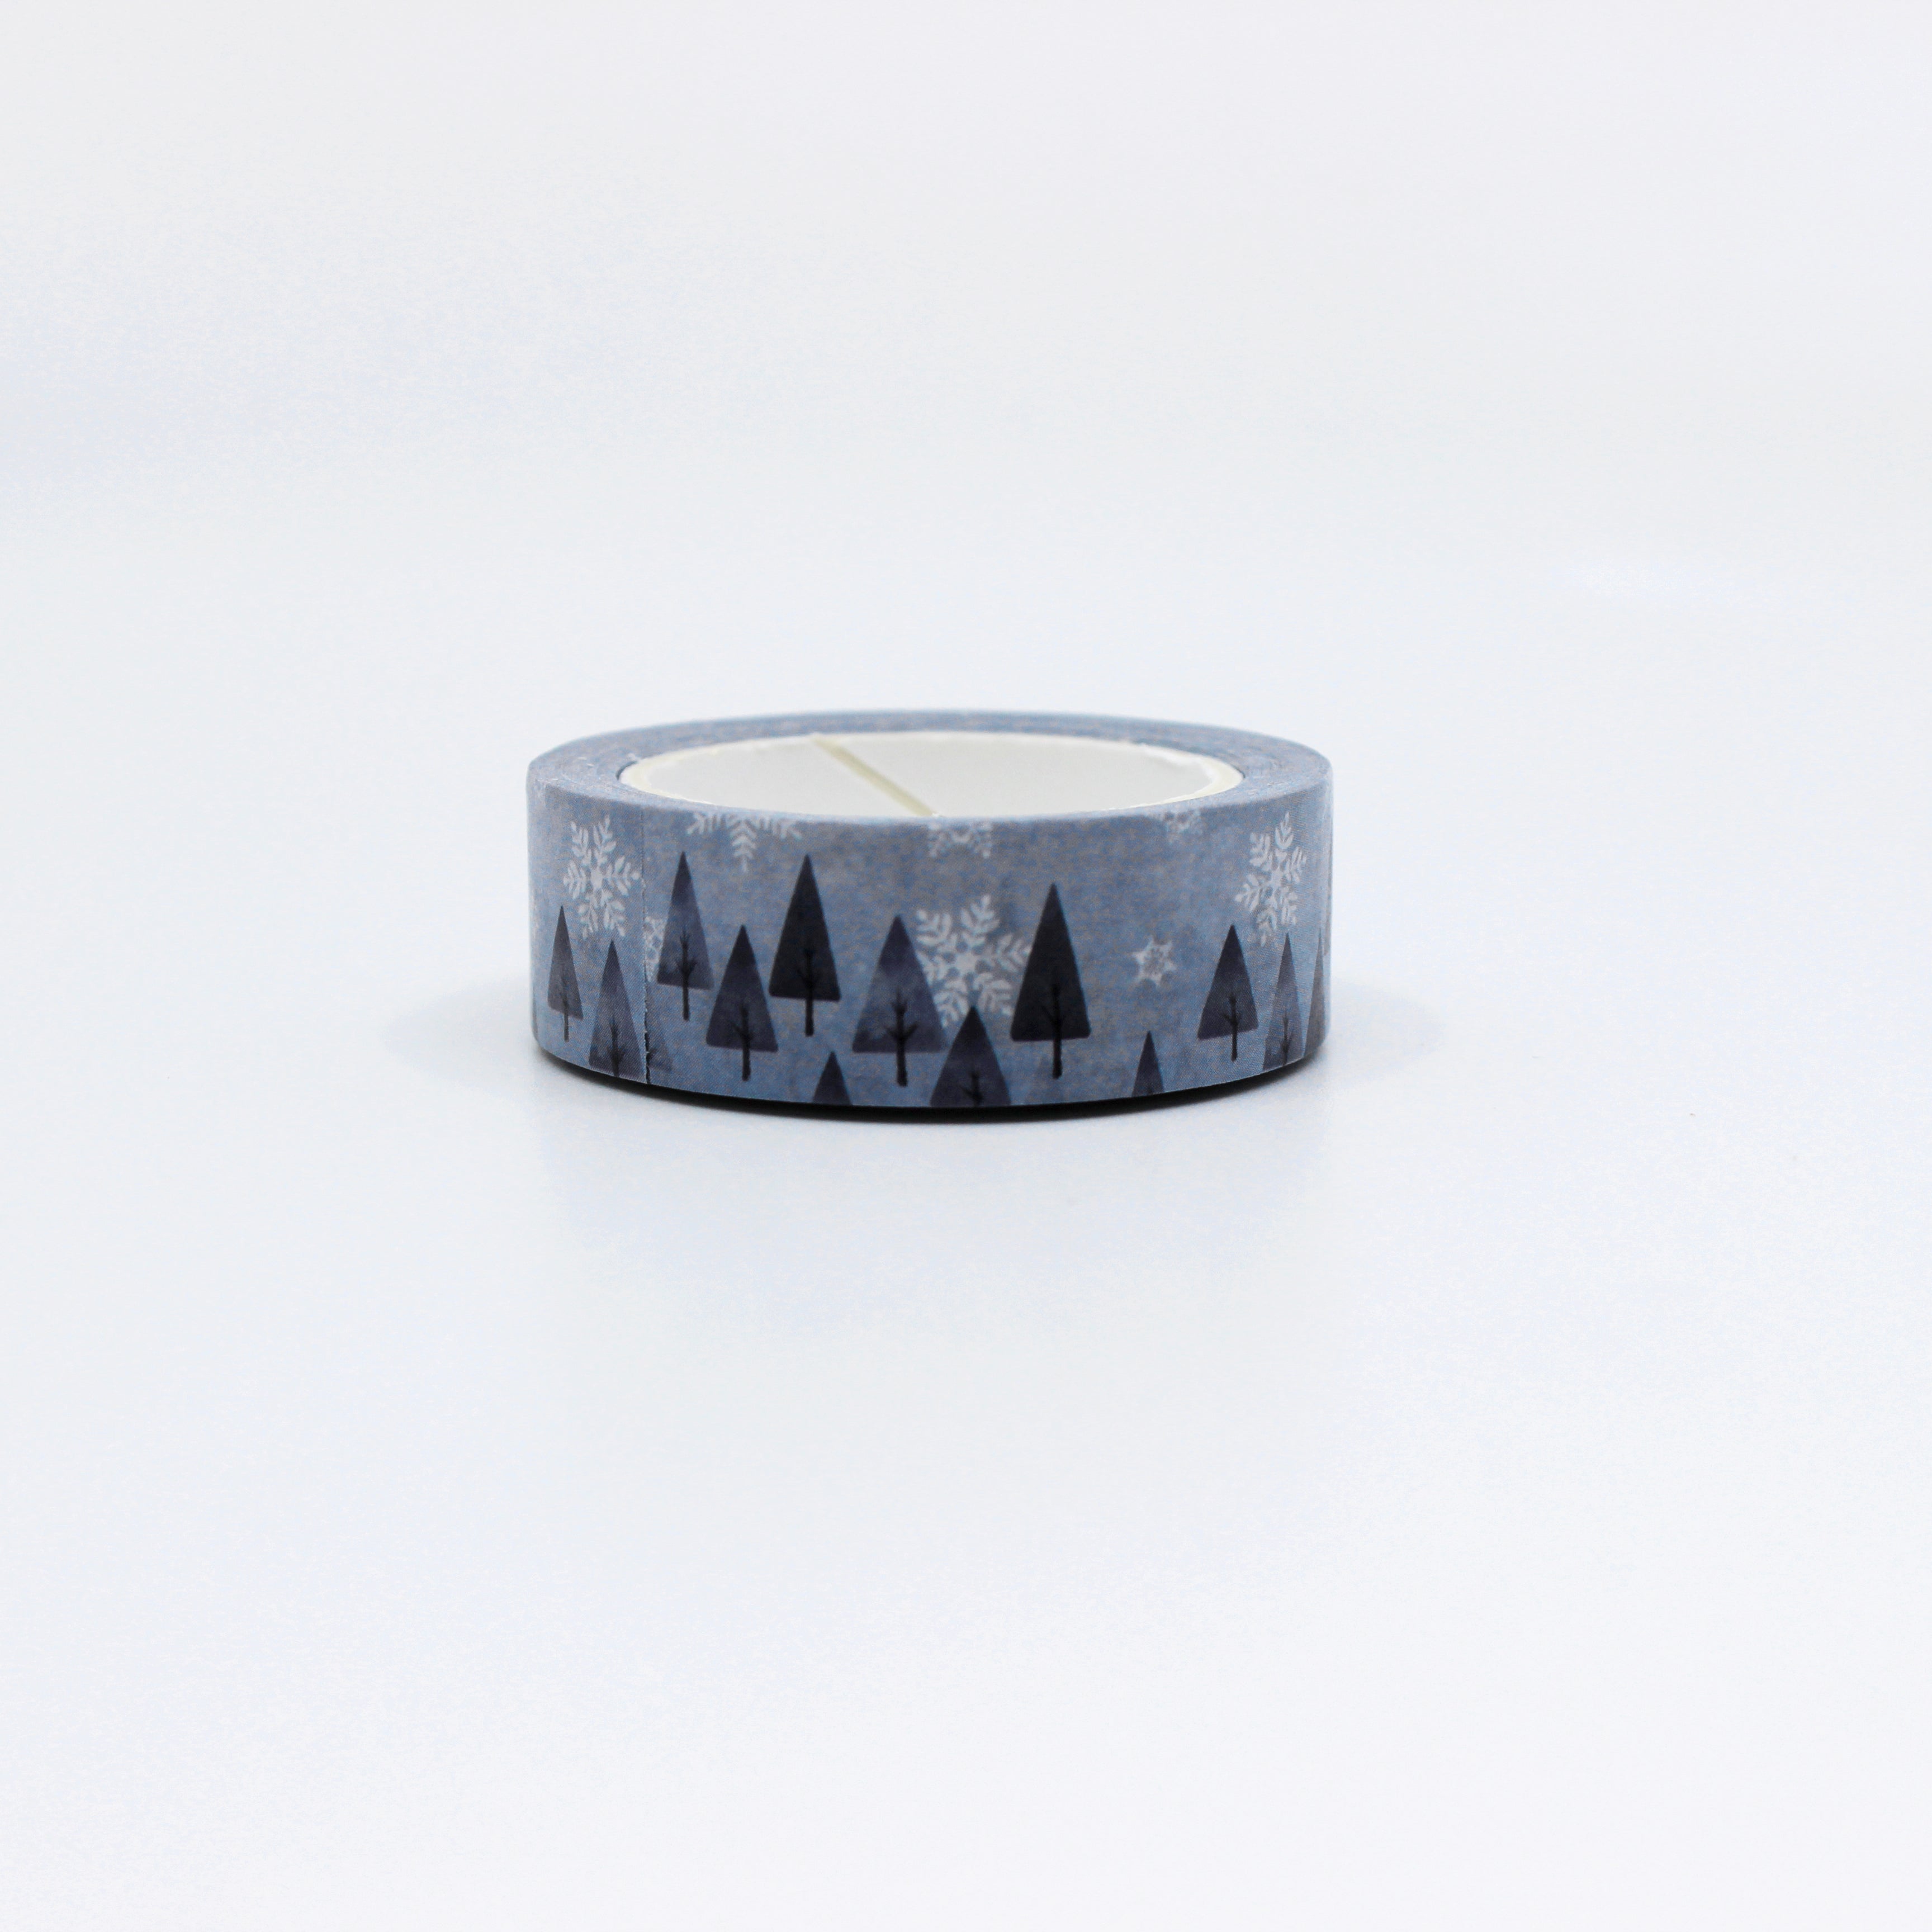 Tree Winter Washi Tape - out of stock